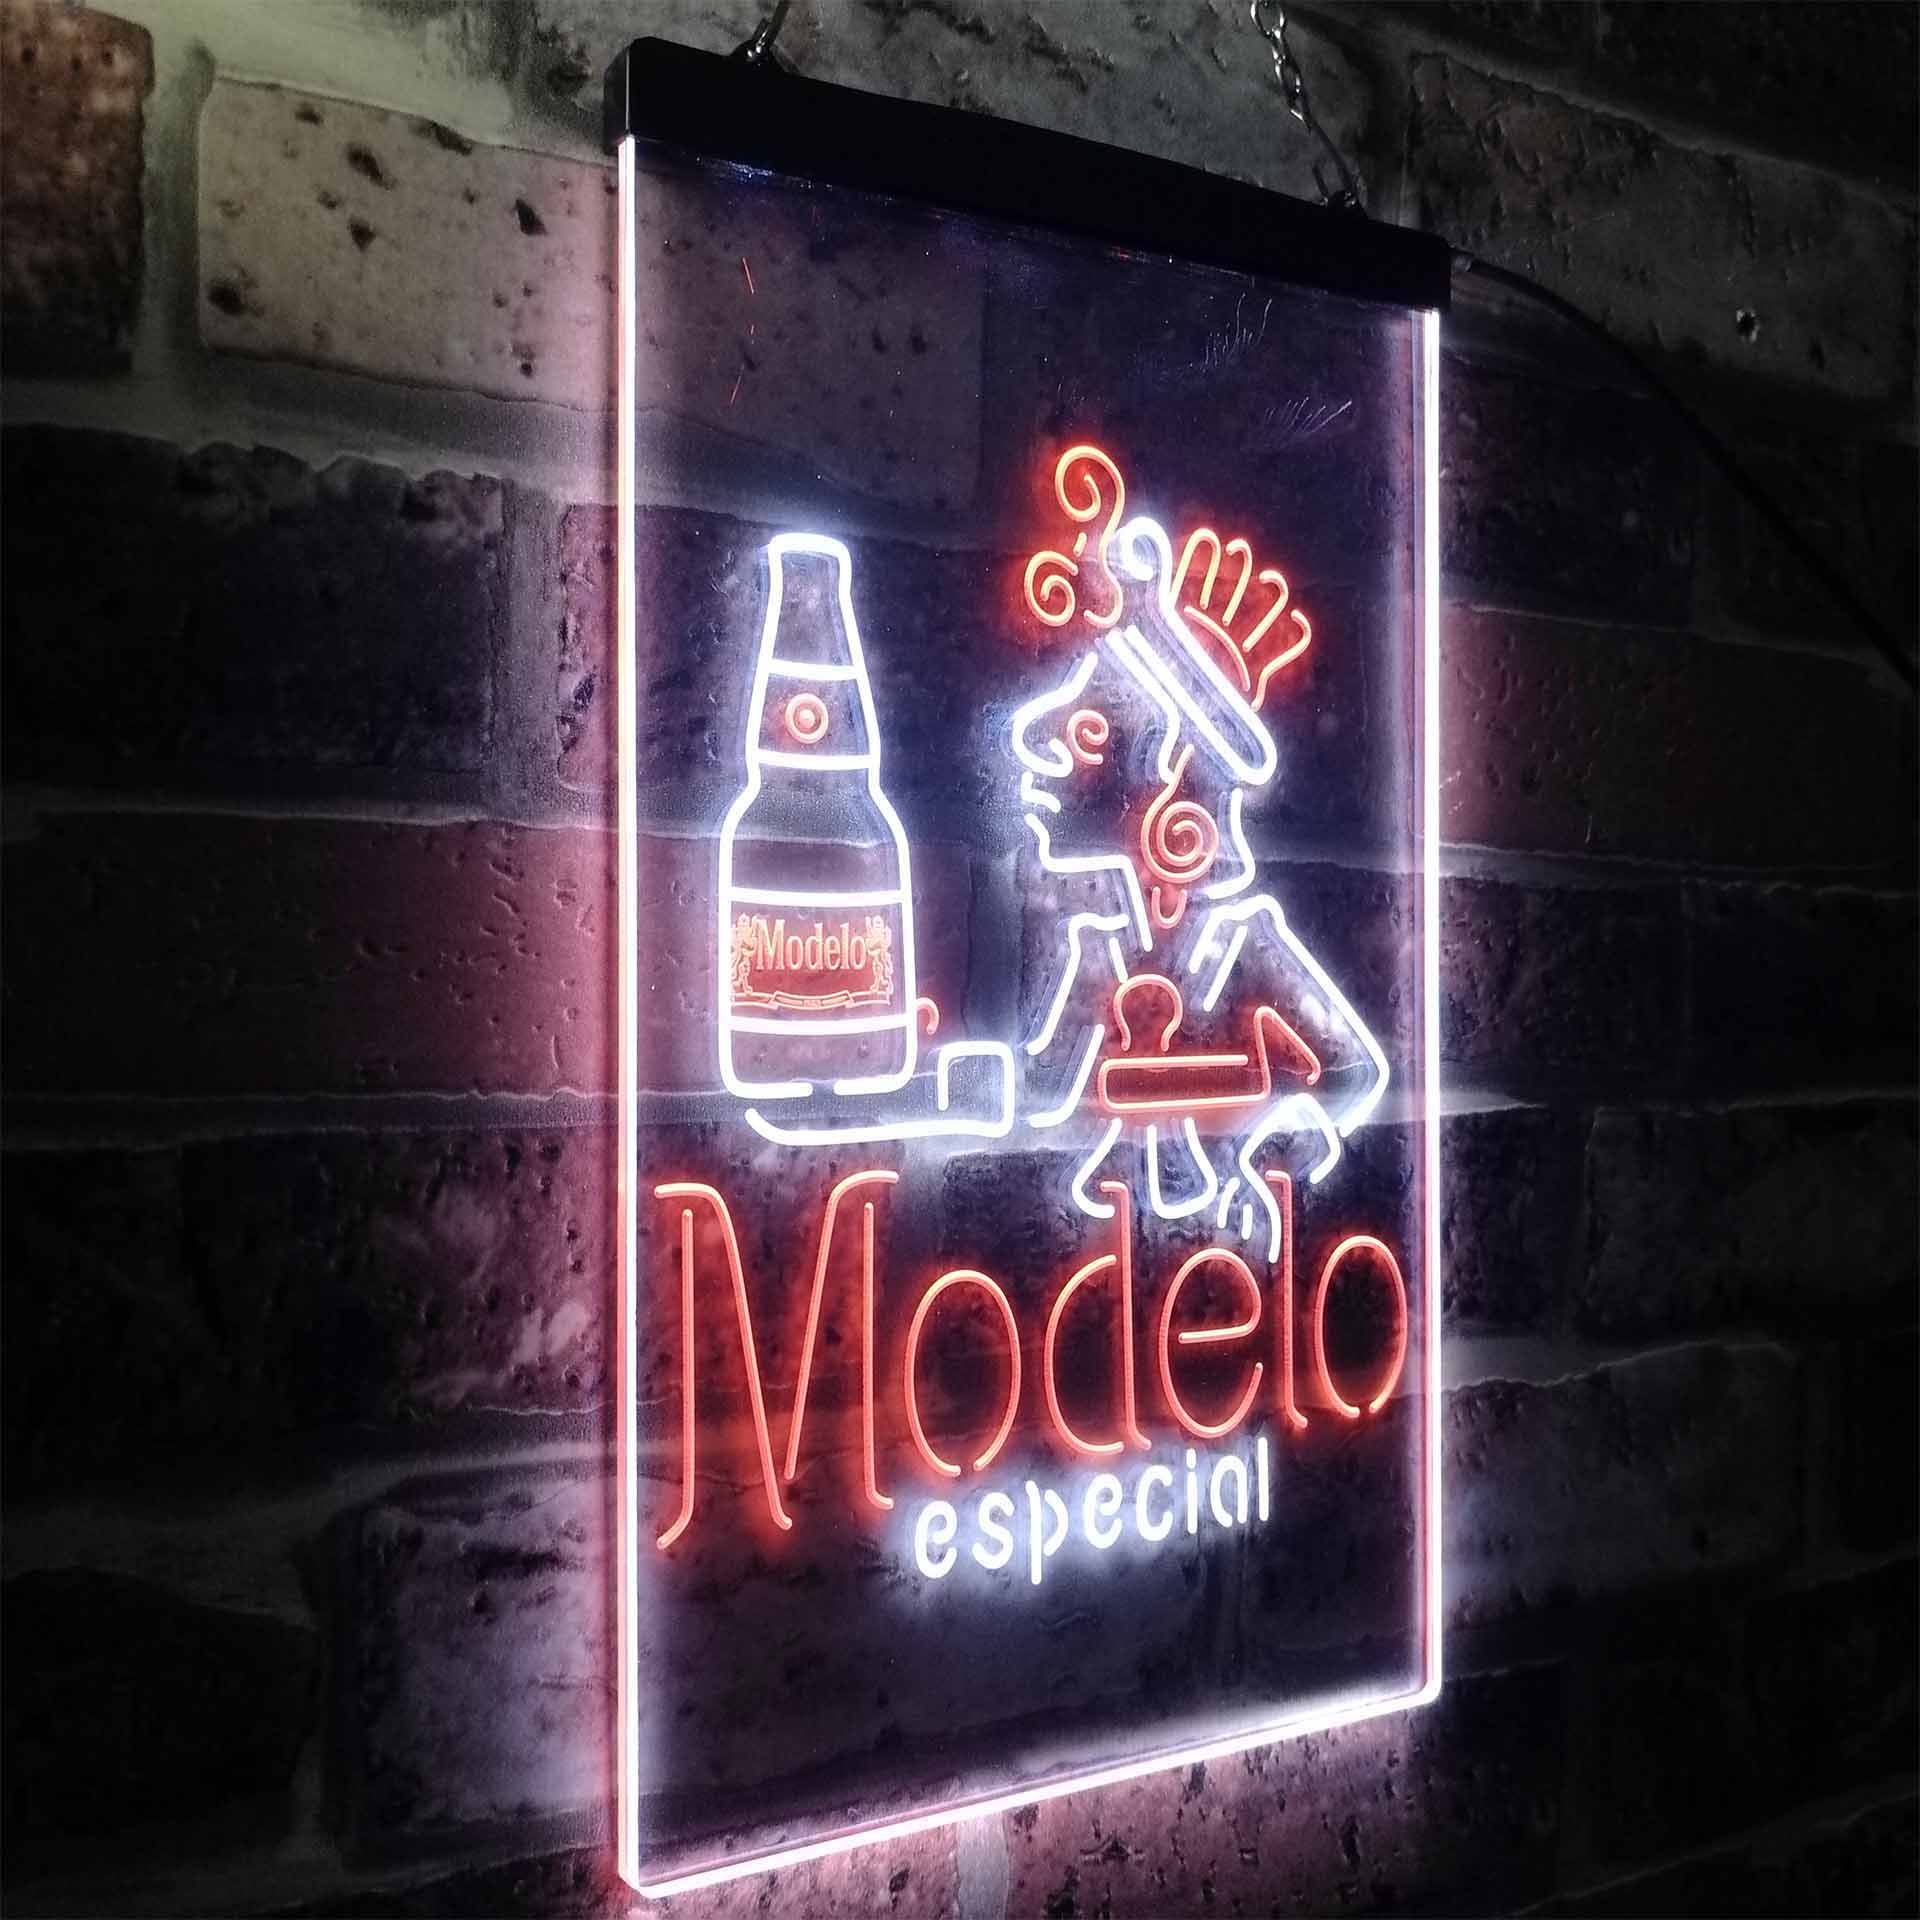 Modelo Especial Adjunct Lager Man Cave Neon LED Sign